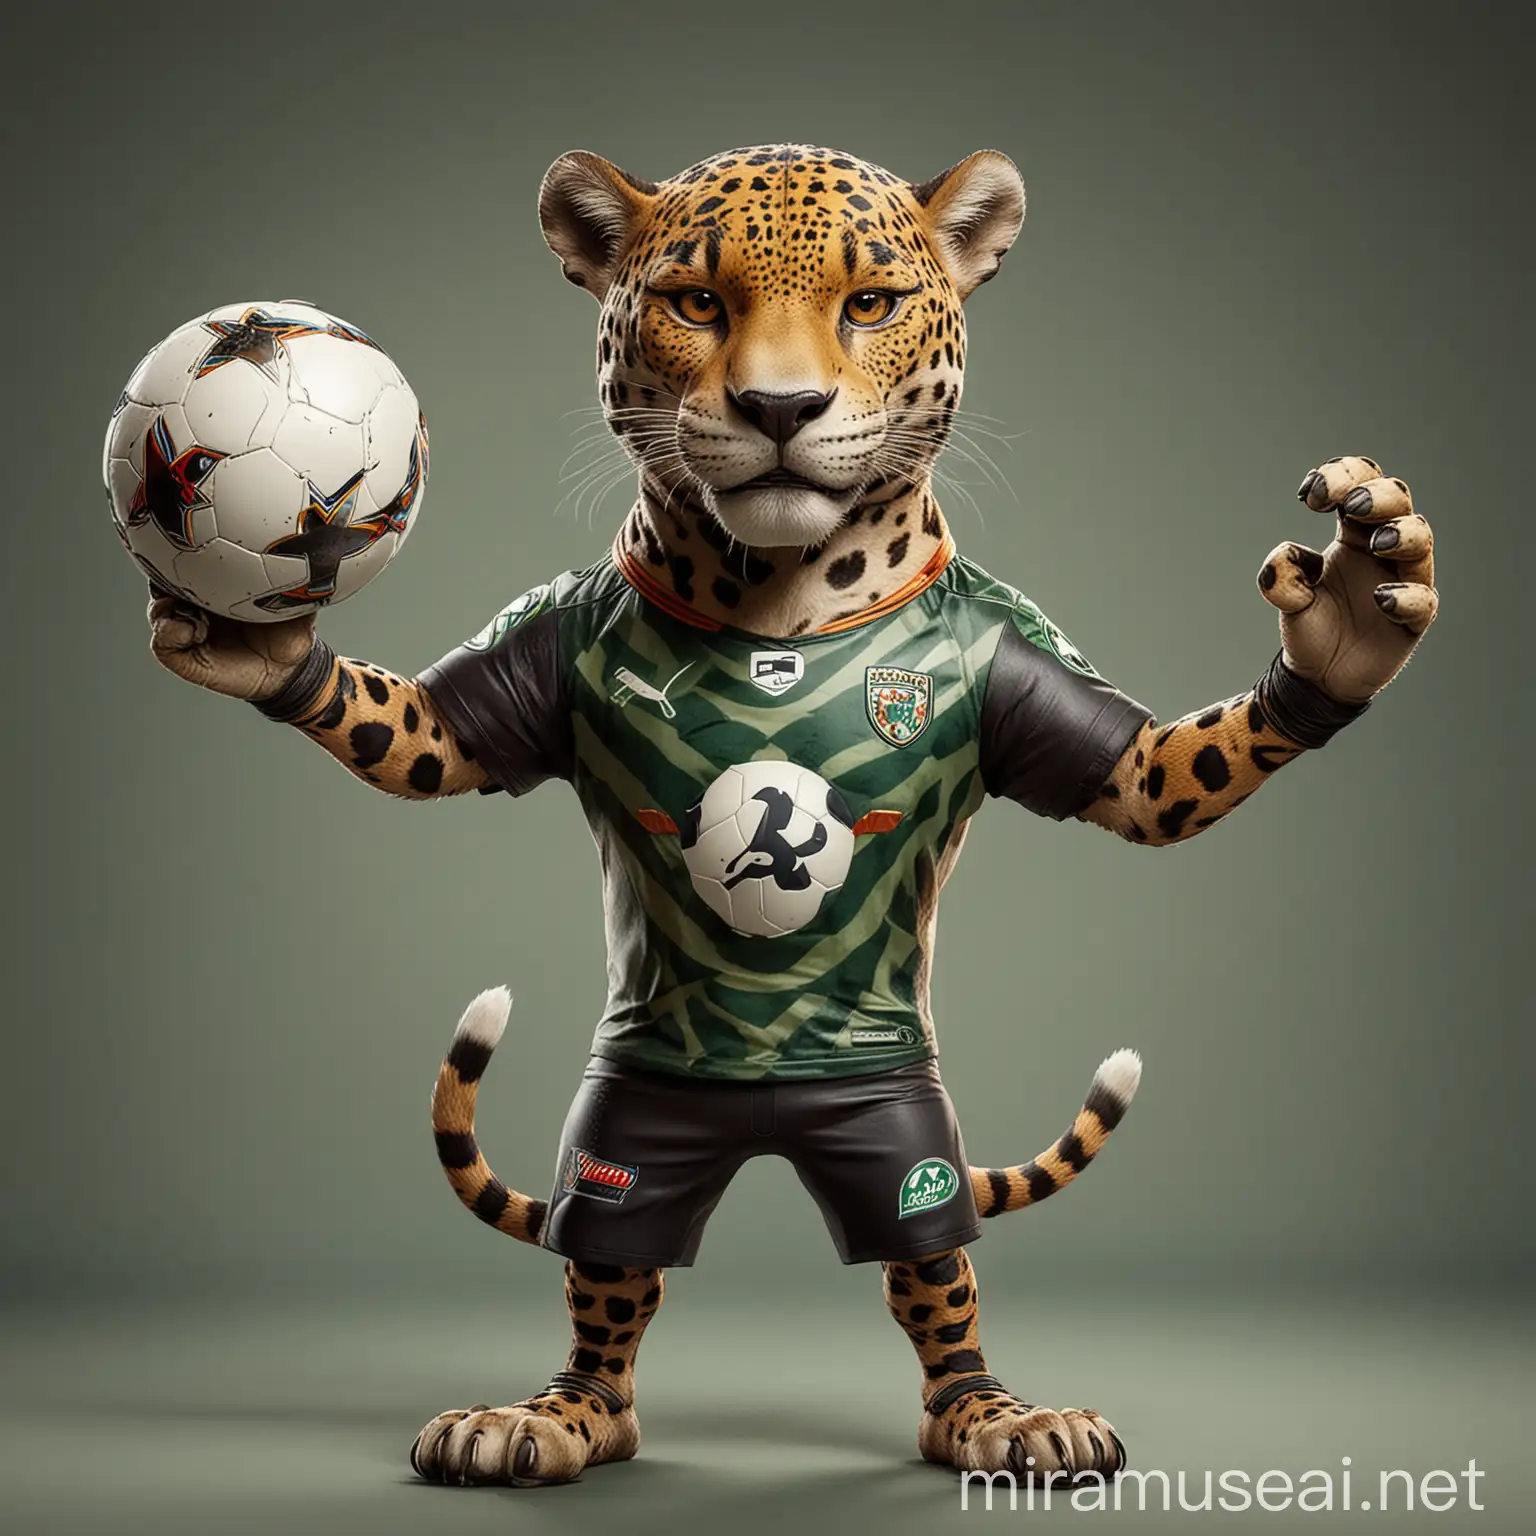 Friendly Soccer Jaguar Celebrating Victory with Ball